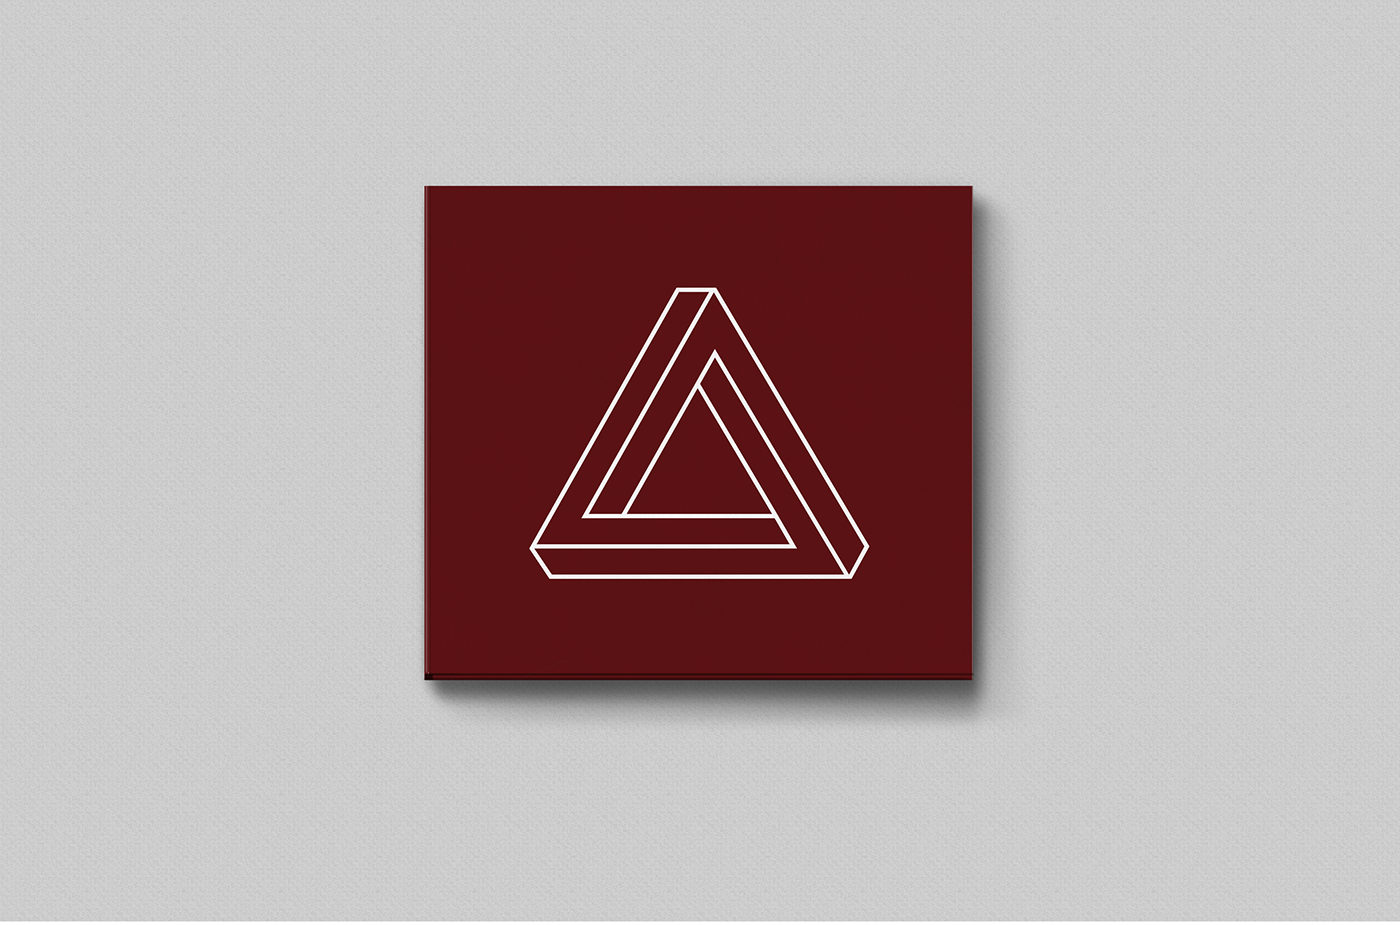 minimal red triangle irrational geometry mechanics band Trip-hop editorial Pack digifile compact cover Album